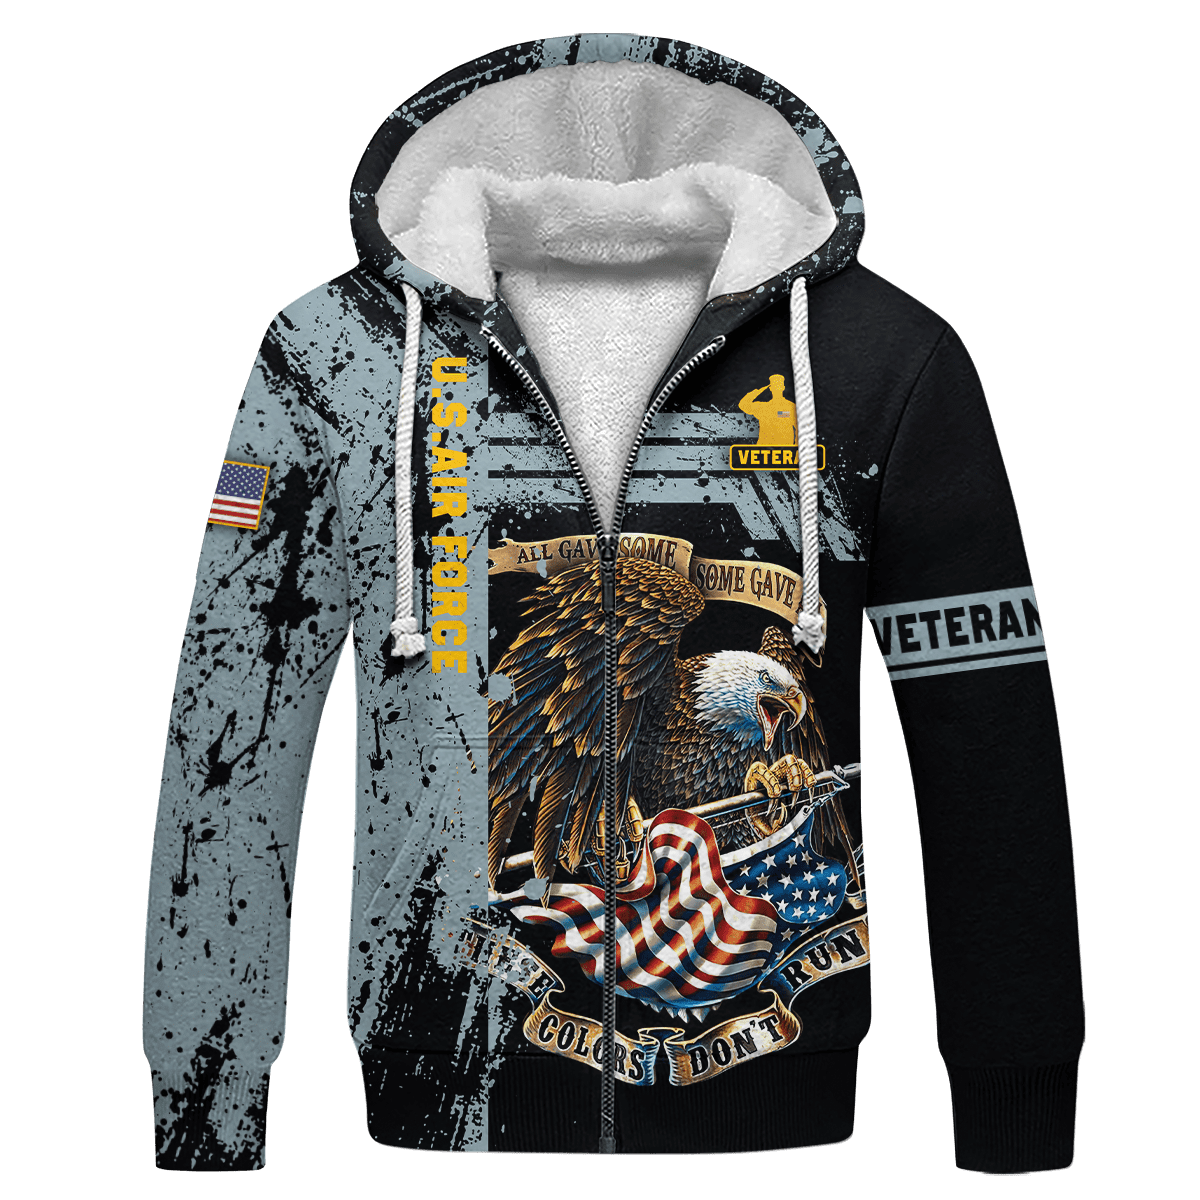 US Air Force - All Gave Some Some Gave All Zip Hoodie